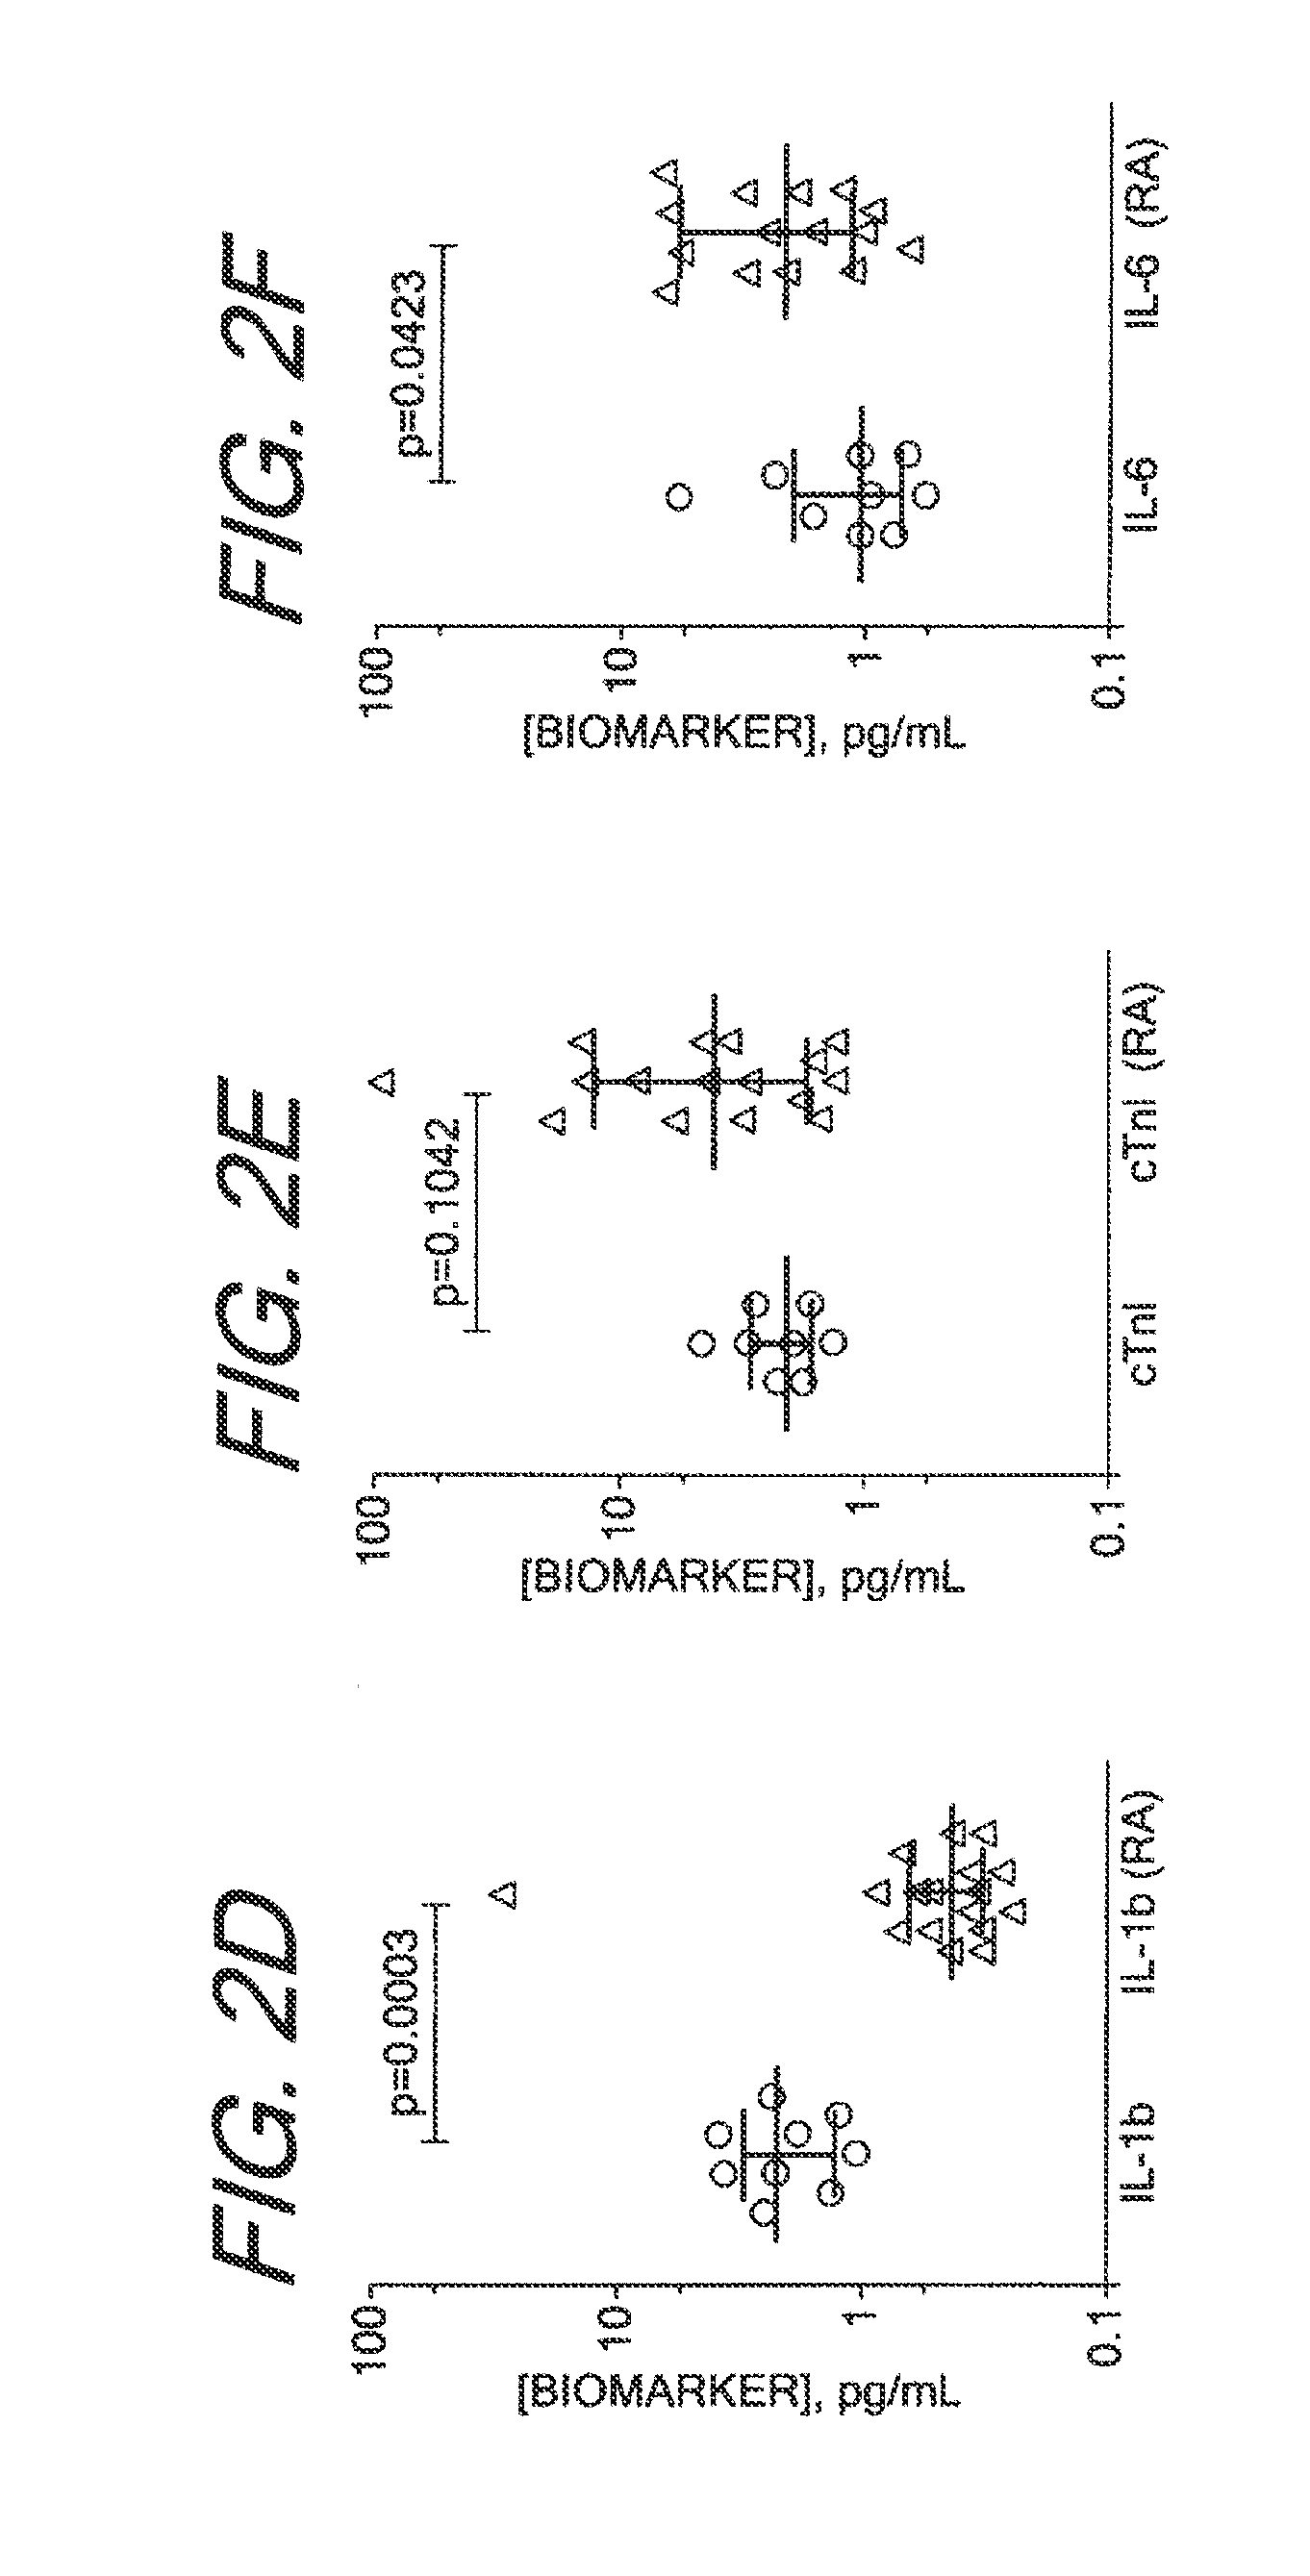 Methods for Diagnosing, Staging, Predicting Risk for Developing and Identifying Treatment Responders for Rheumatoid Arthritis